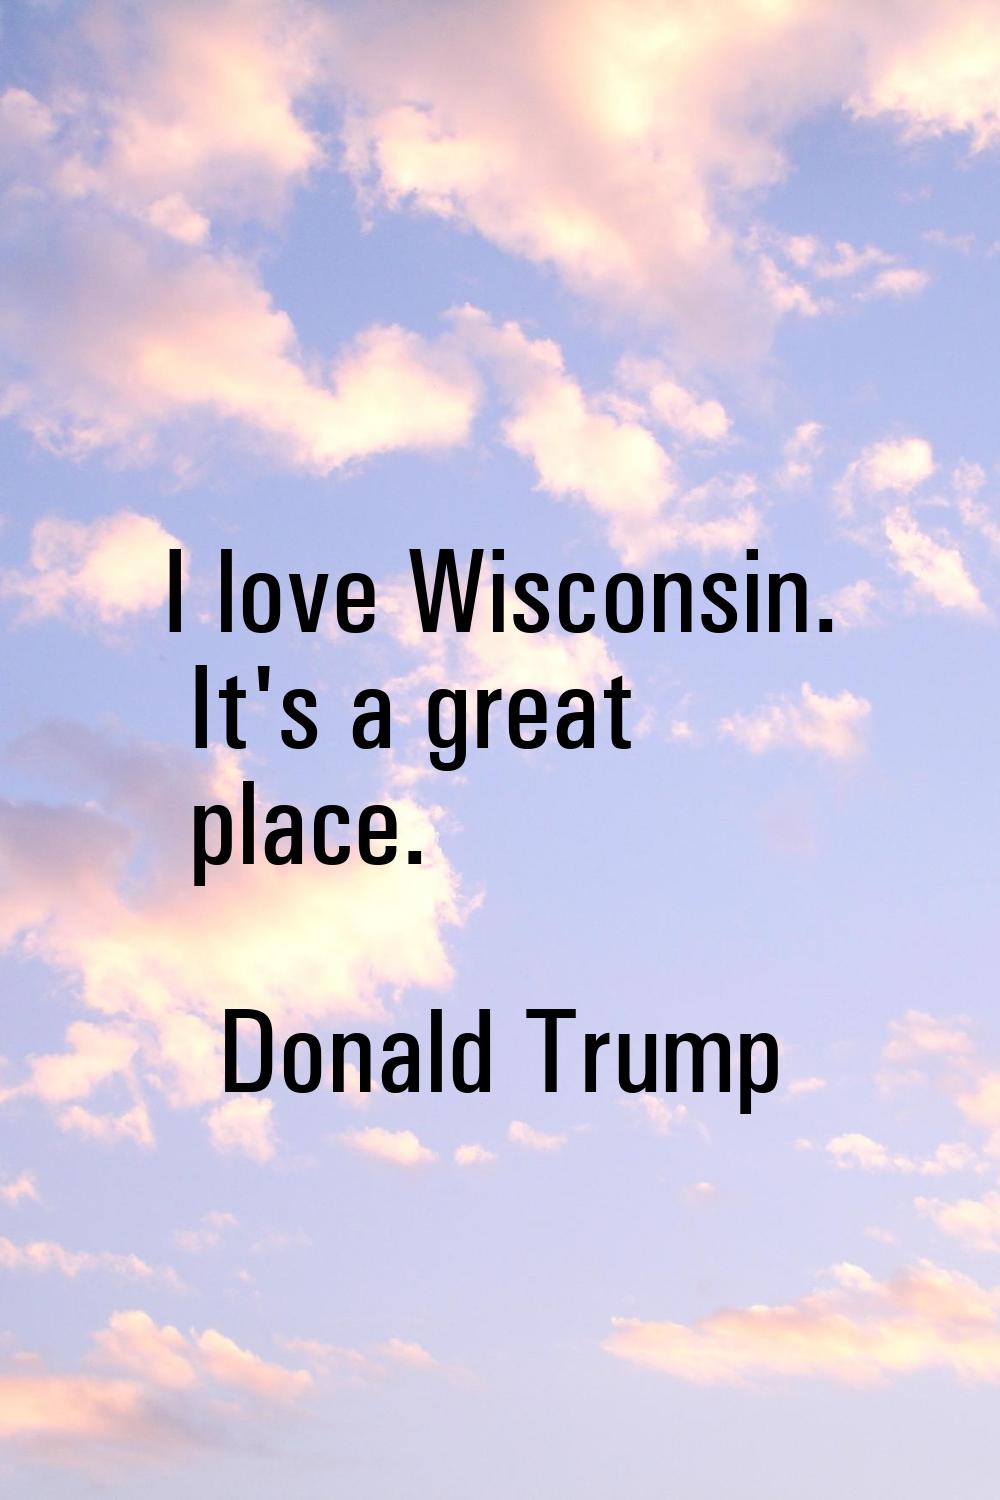 I love Wisconsin. It's a great place.